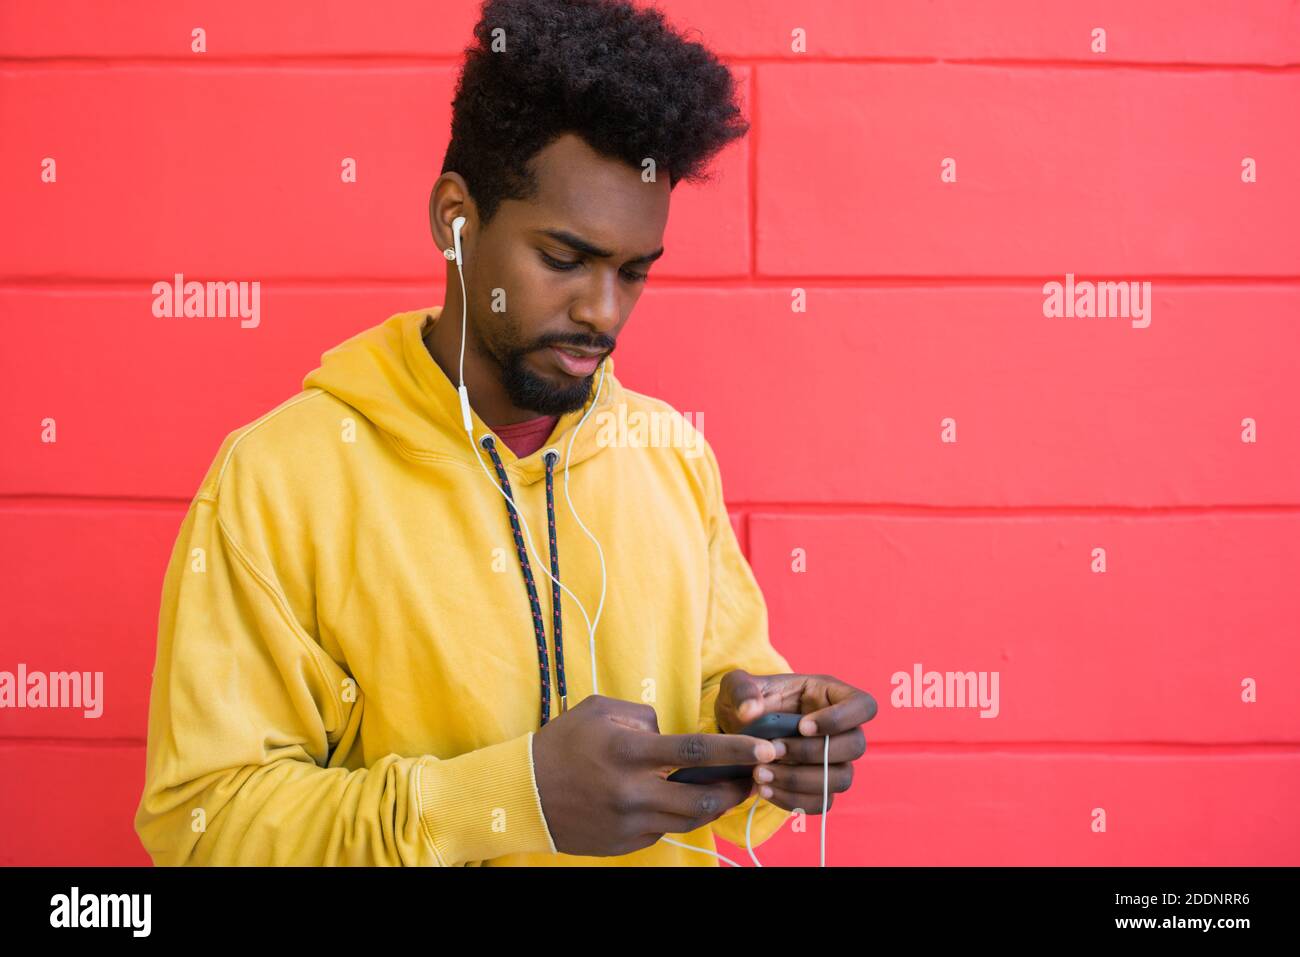 Afro man using his mobile phone. Stock Photo